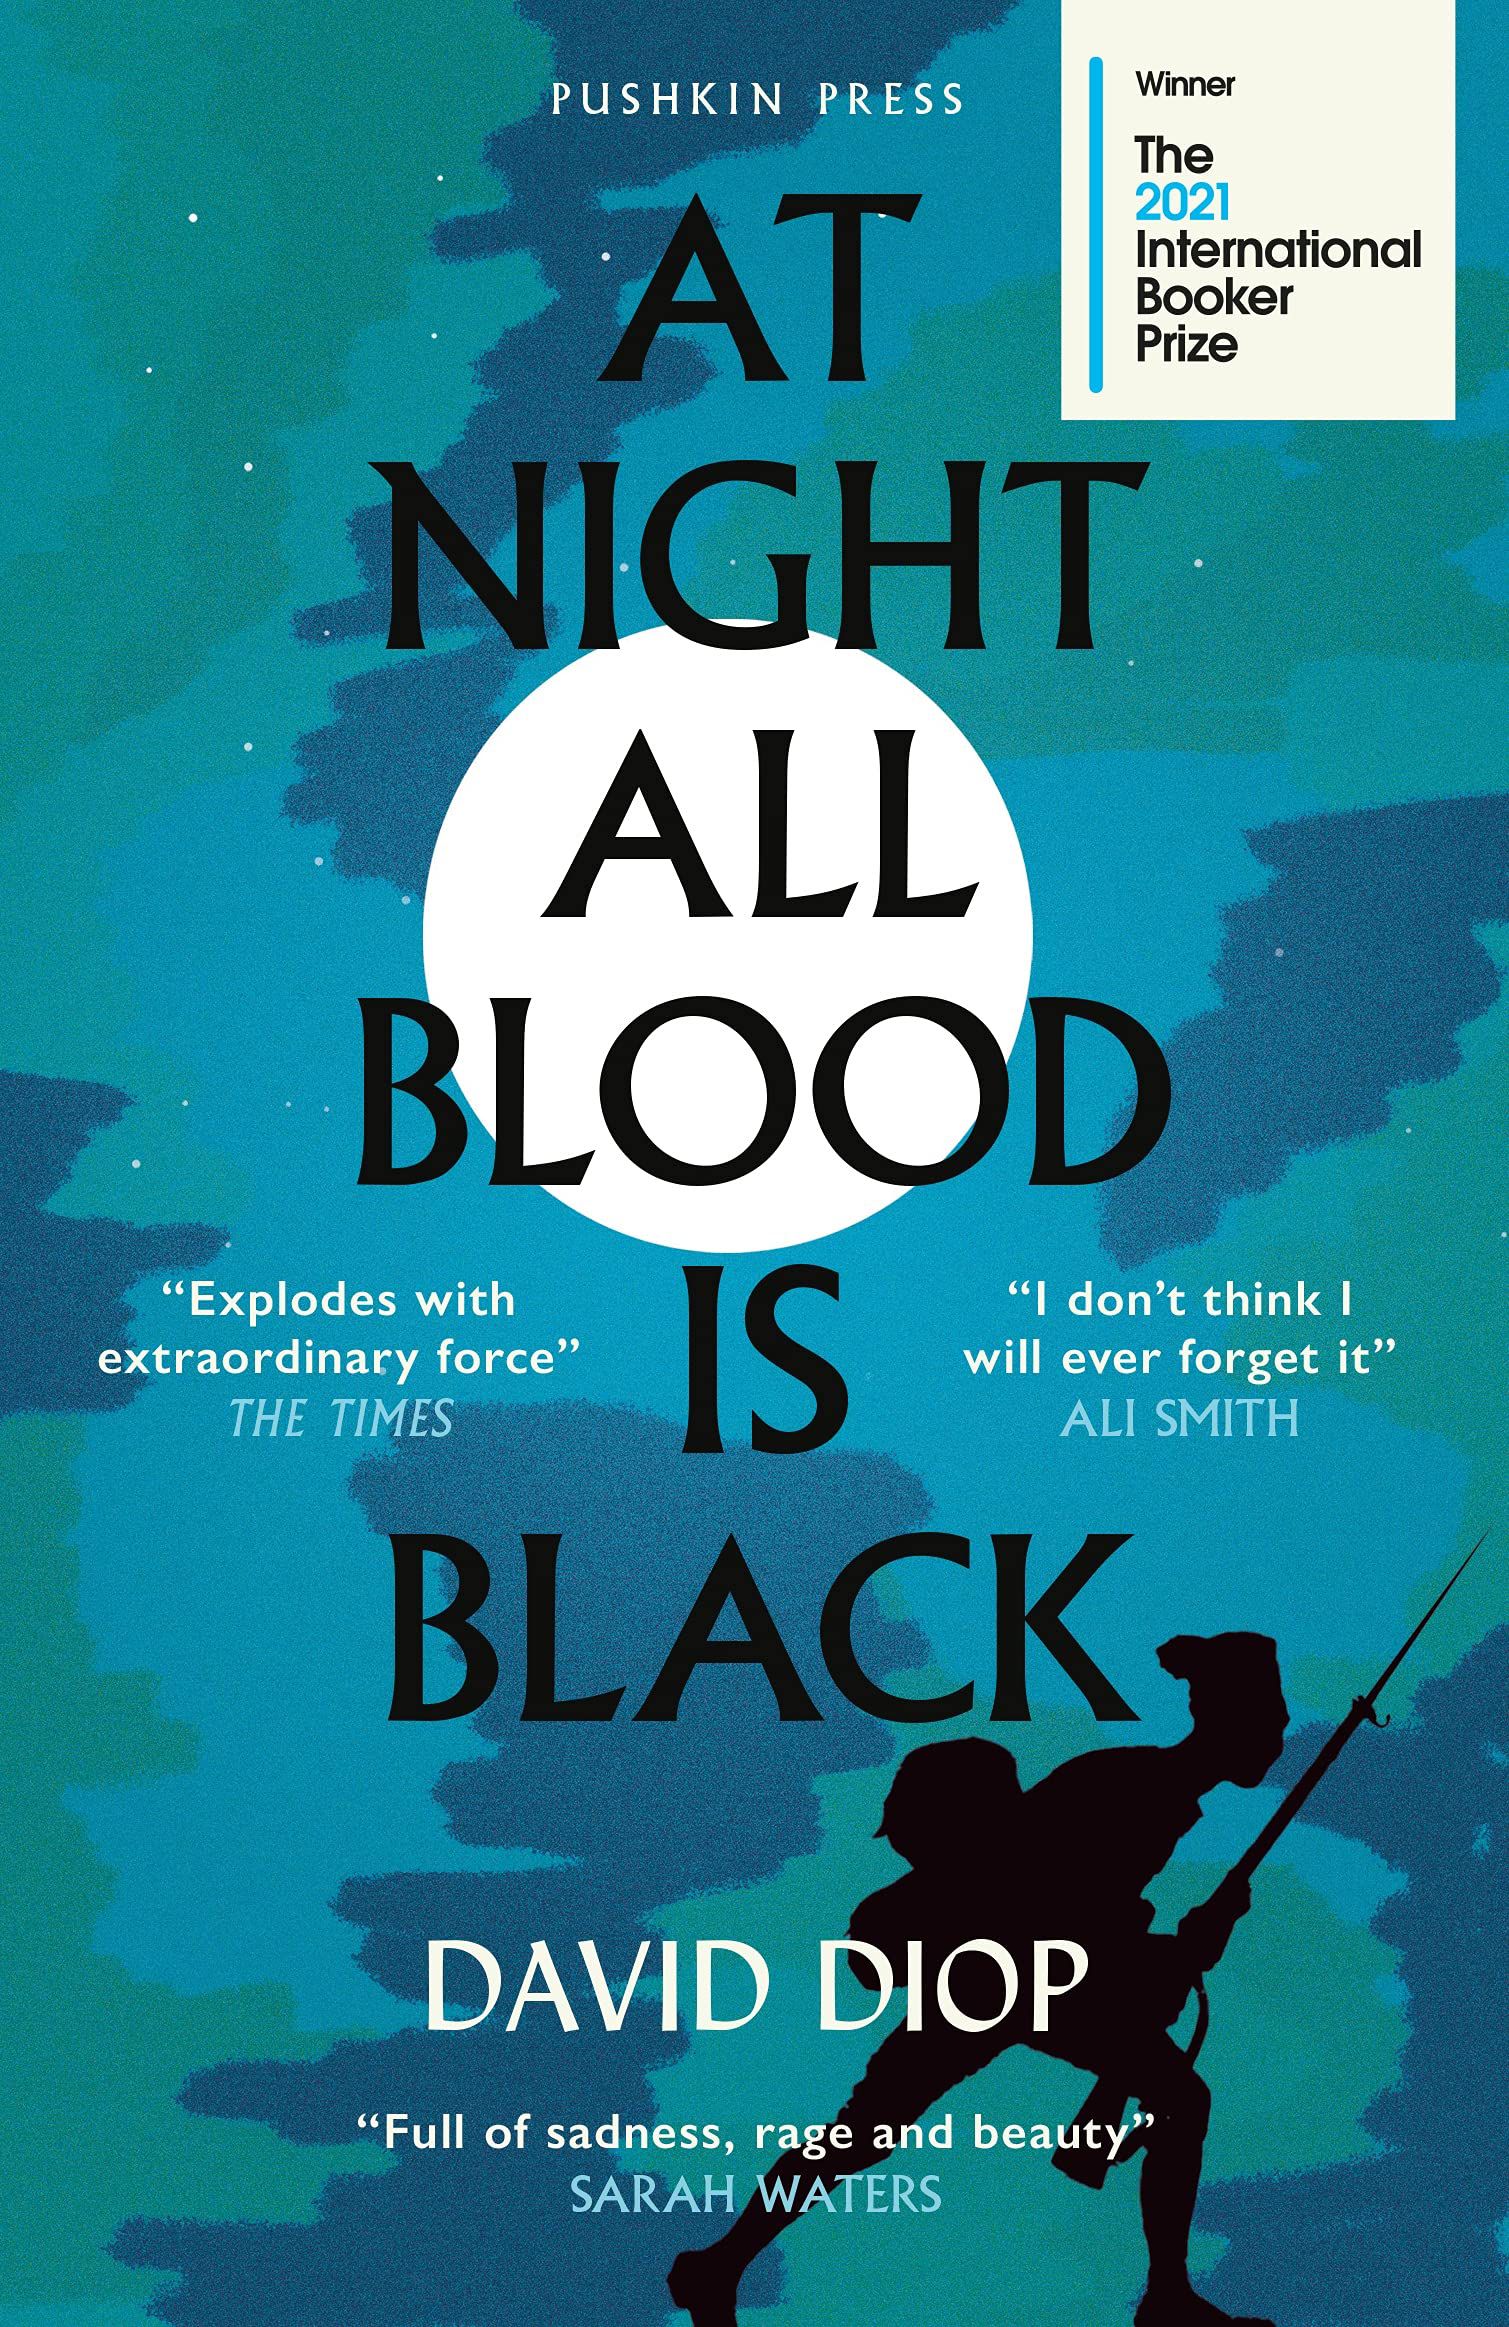     			At Night All Blood is Black: WINNER OF THE INTERNATIONAL BOOKER PRIZE 2021 Paperback by David Diop and Anna Moschovakis